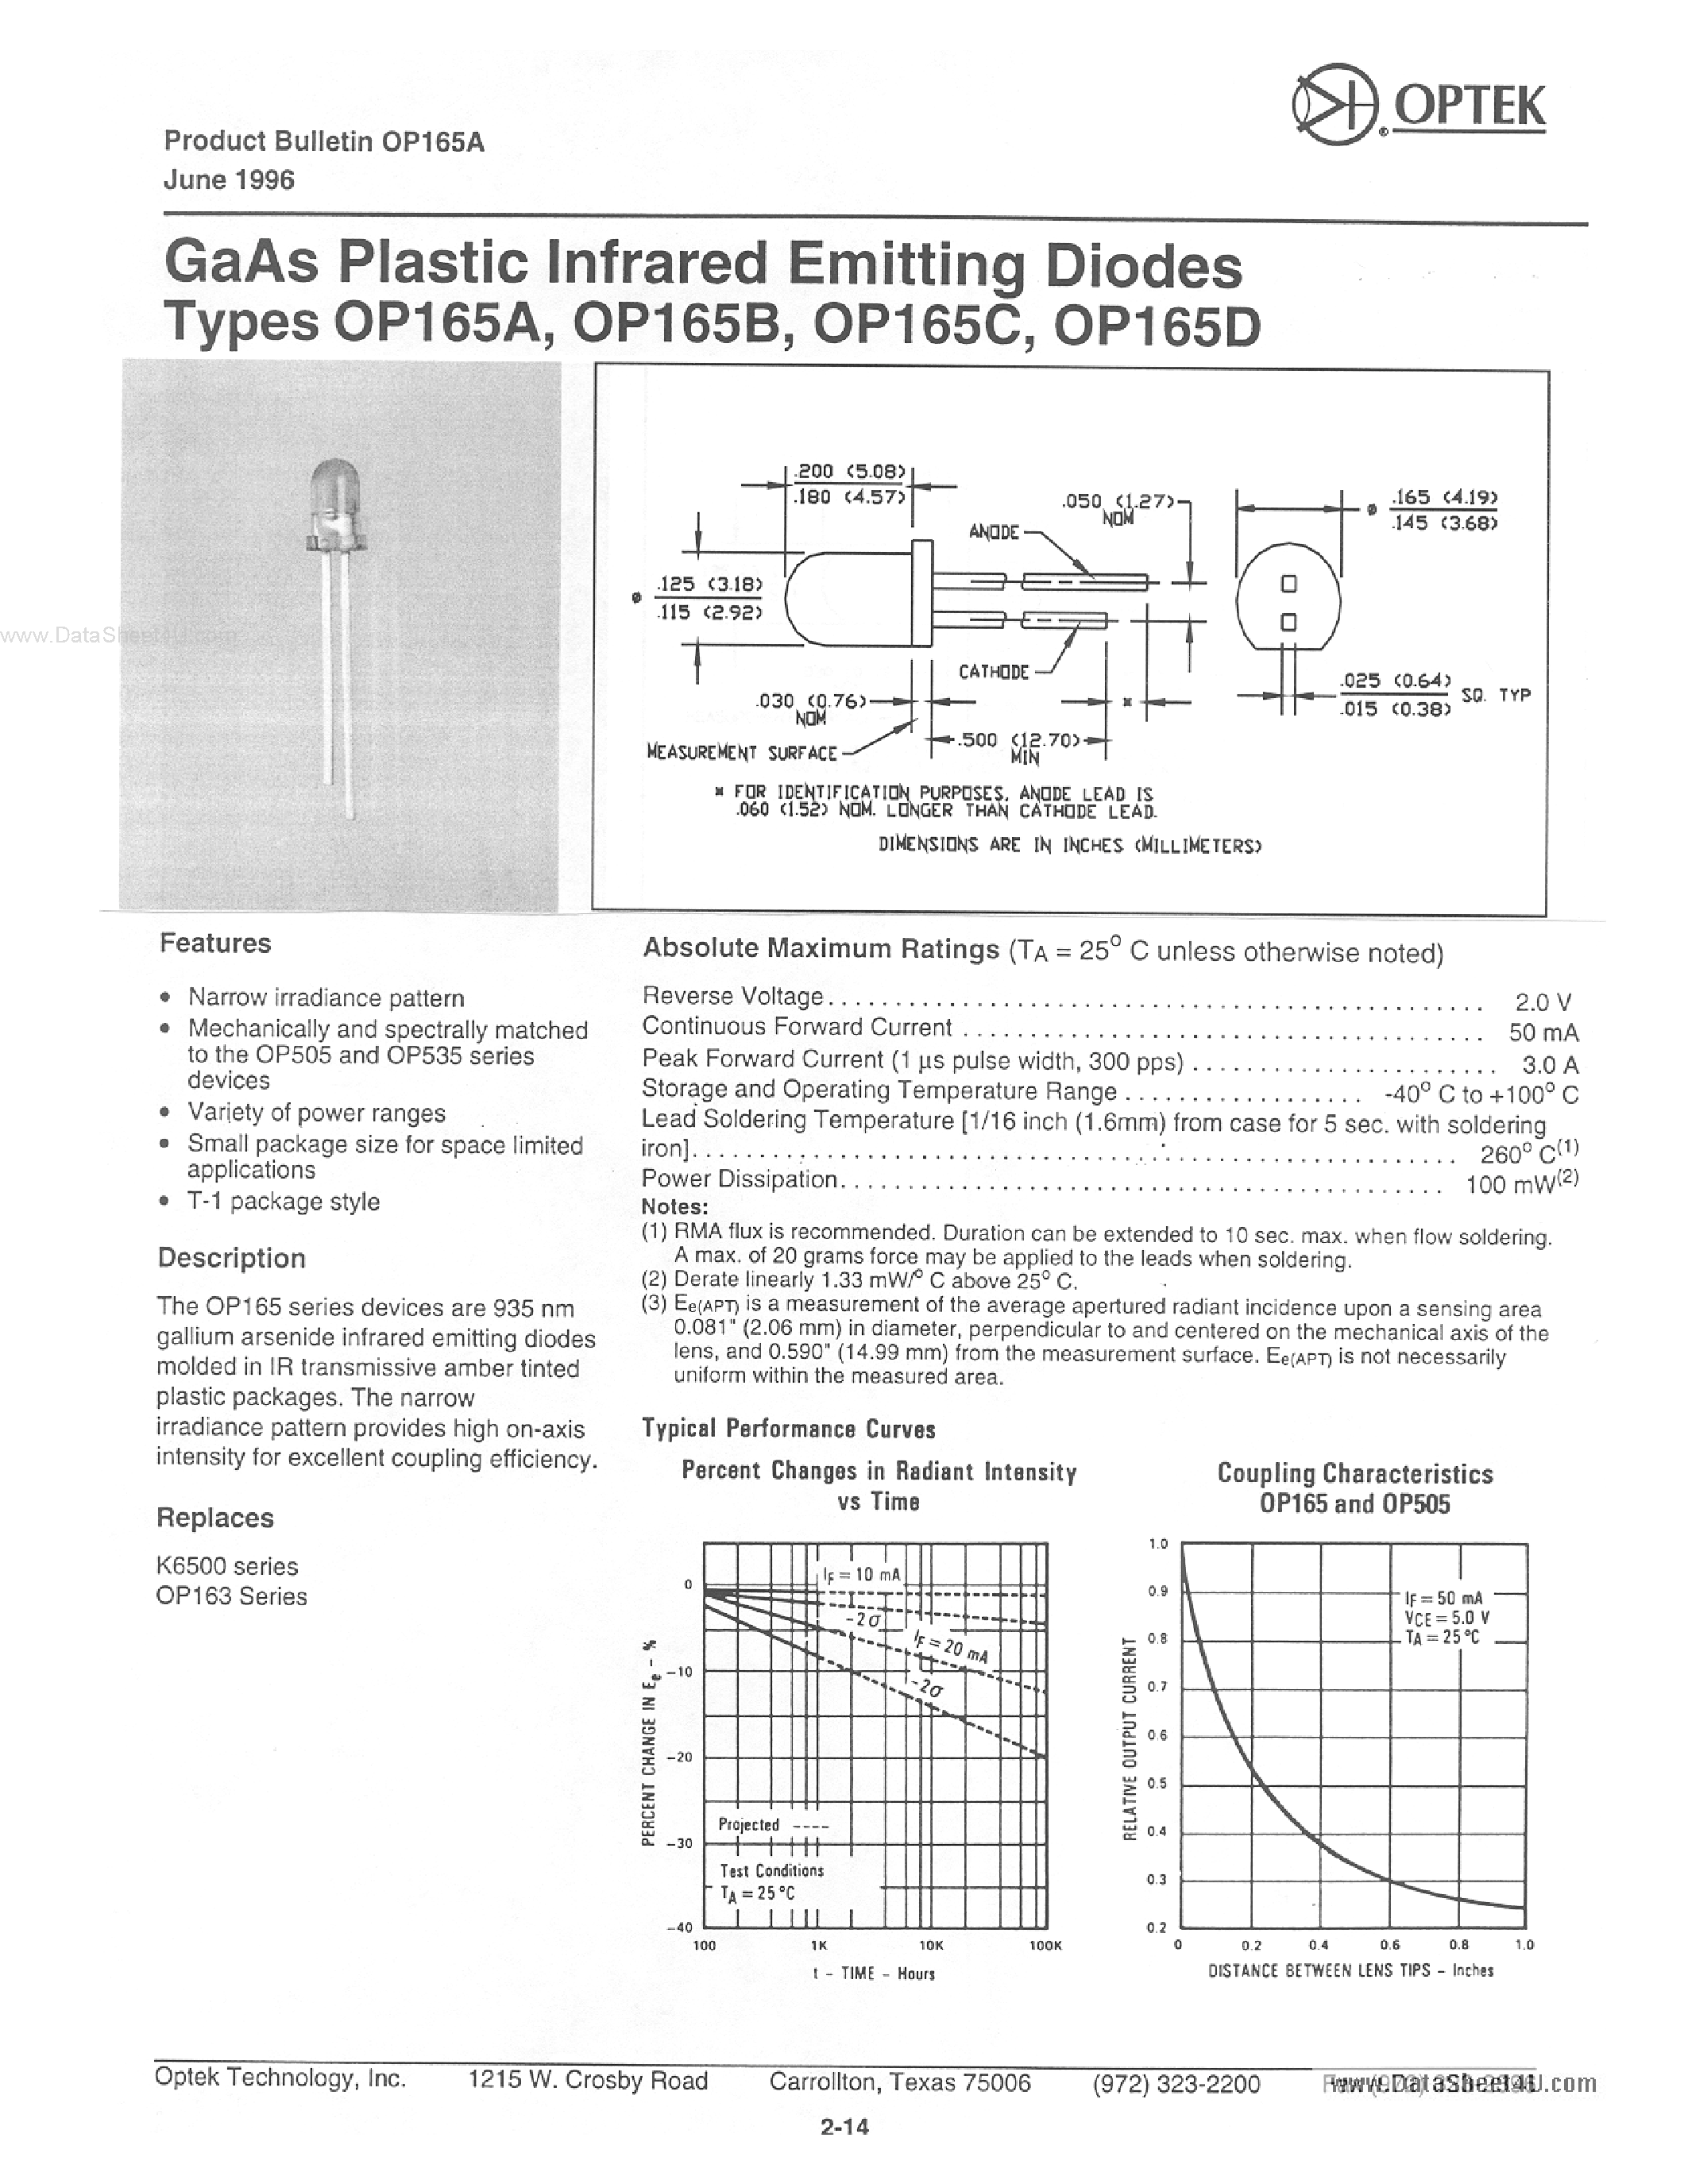 Datasheet OP165A - GaAs Plastic Infrared Emitting Diodes page 1